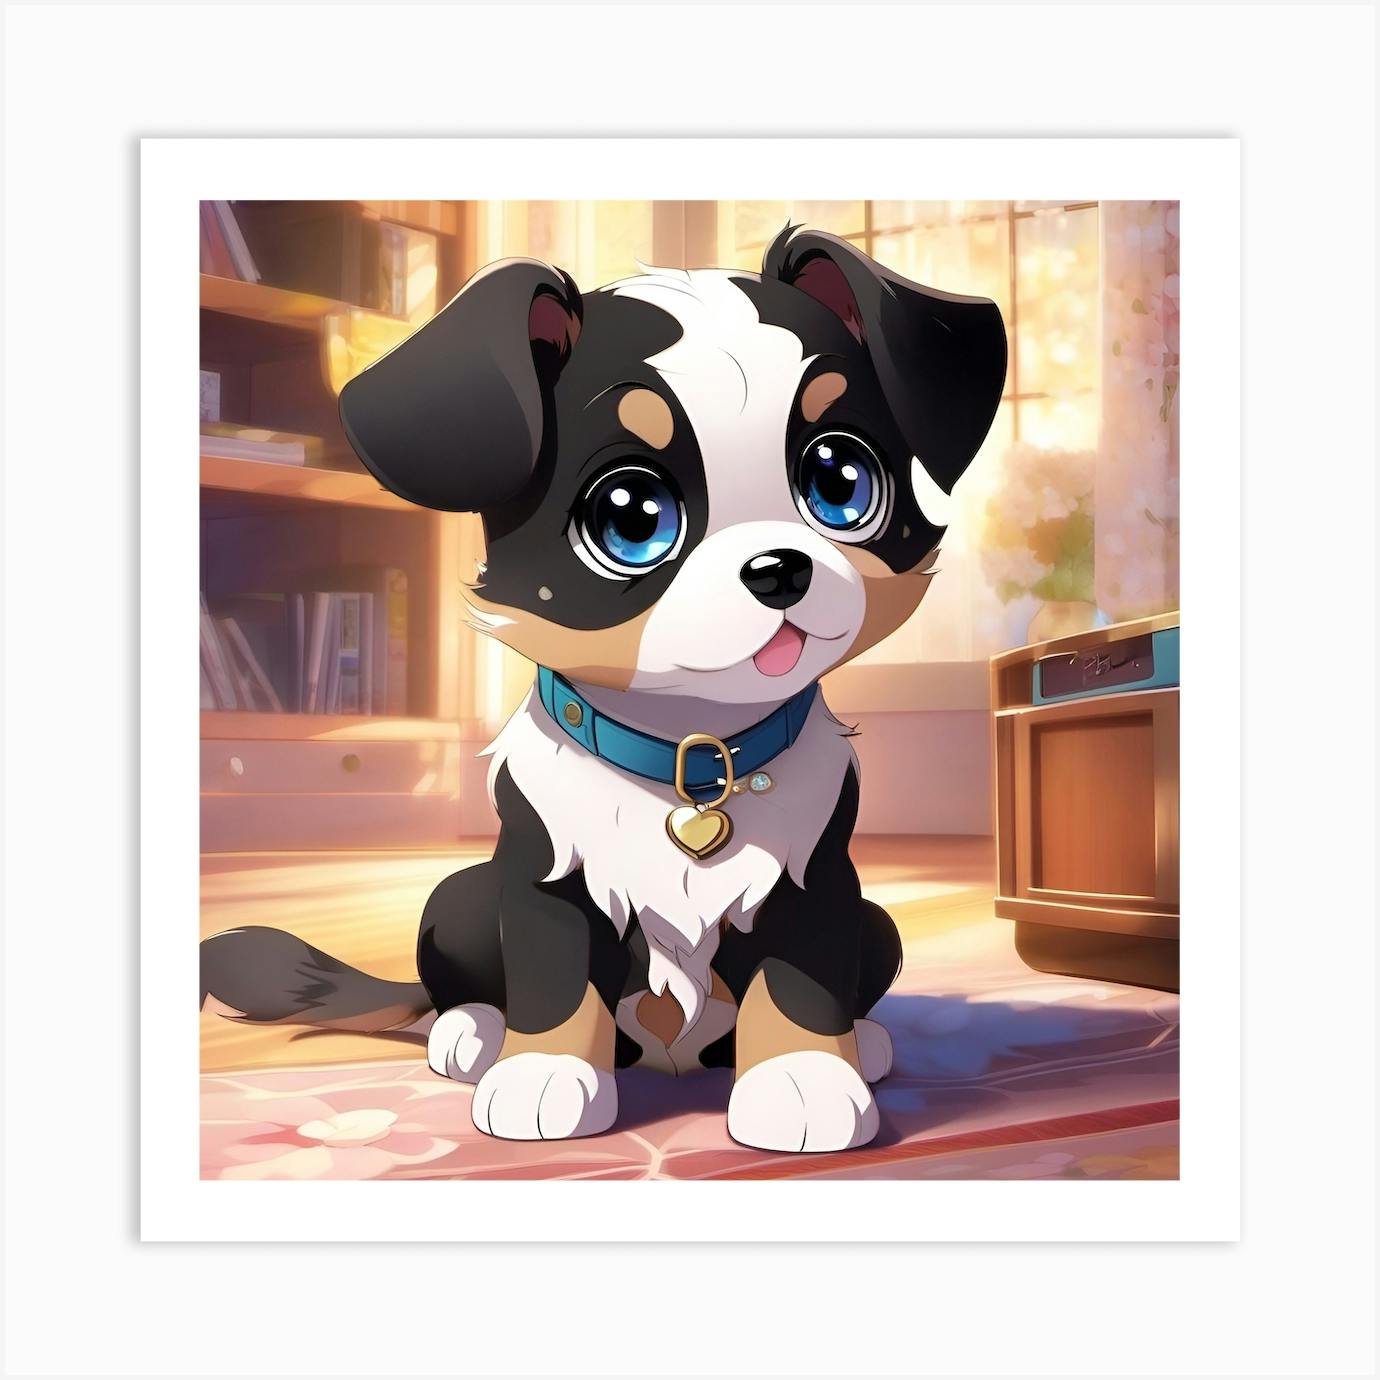 Anime Puppy Wallpaper - Apps on Google Play